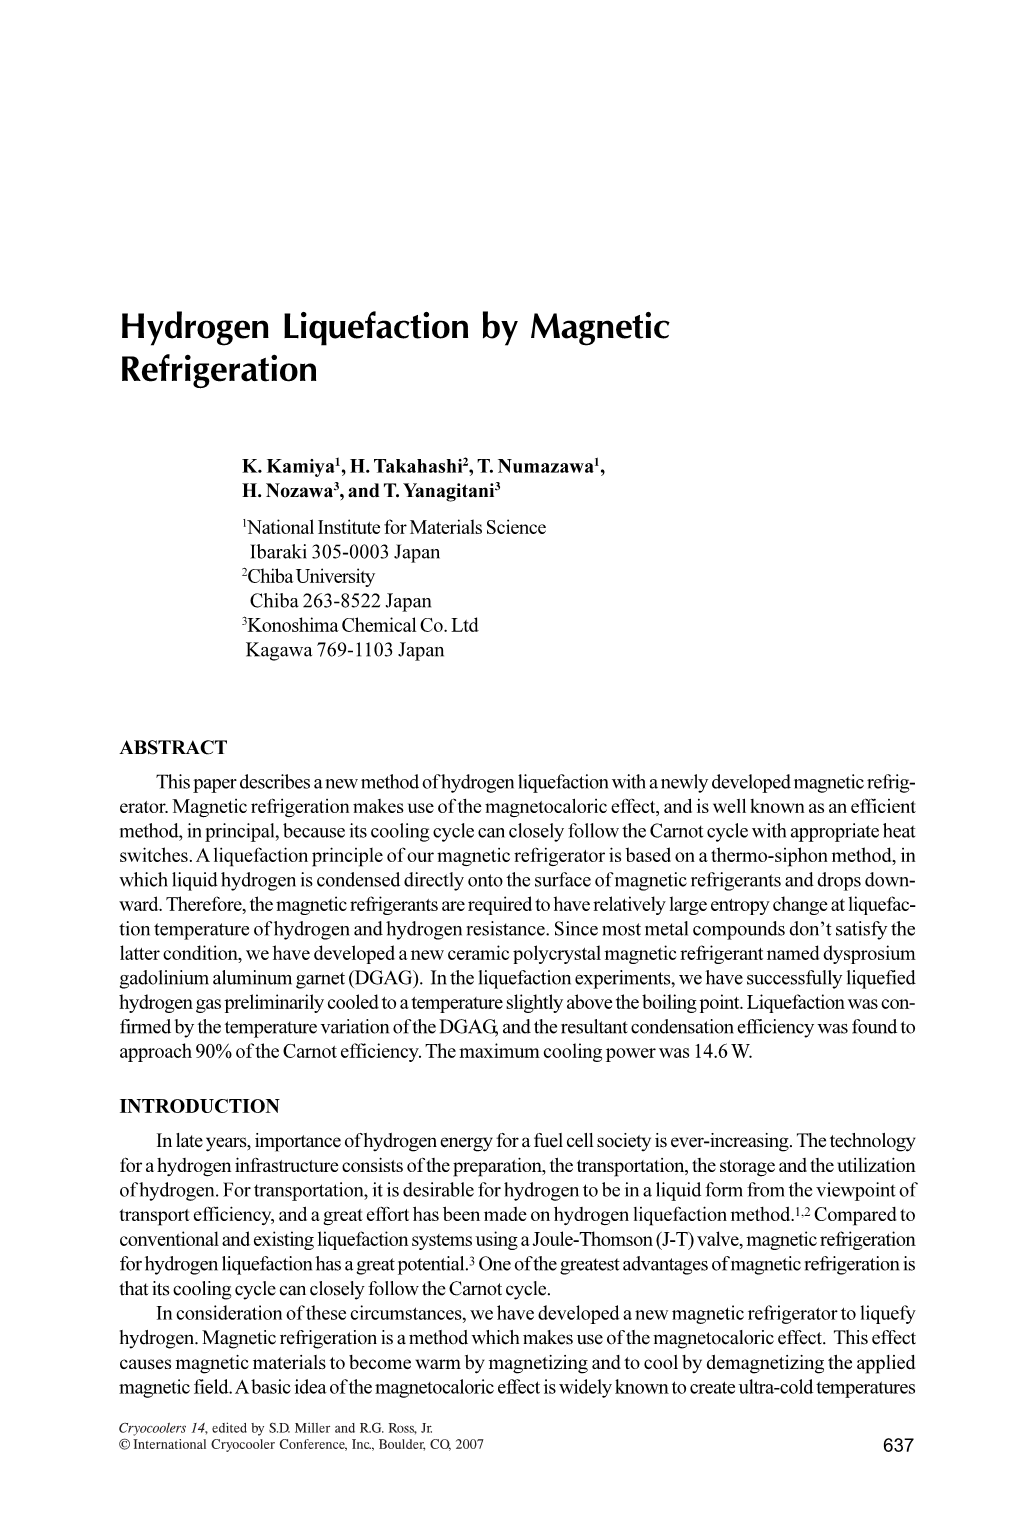 Hydrogen Liquefaction by Magnetic Refrigeration